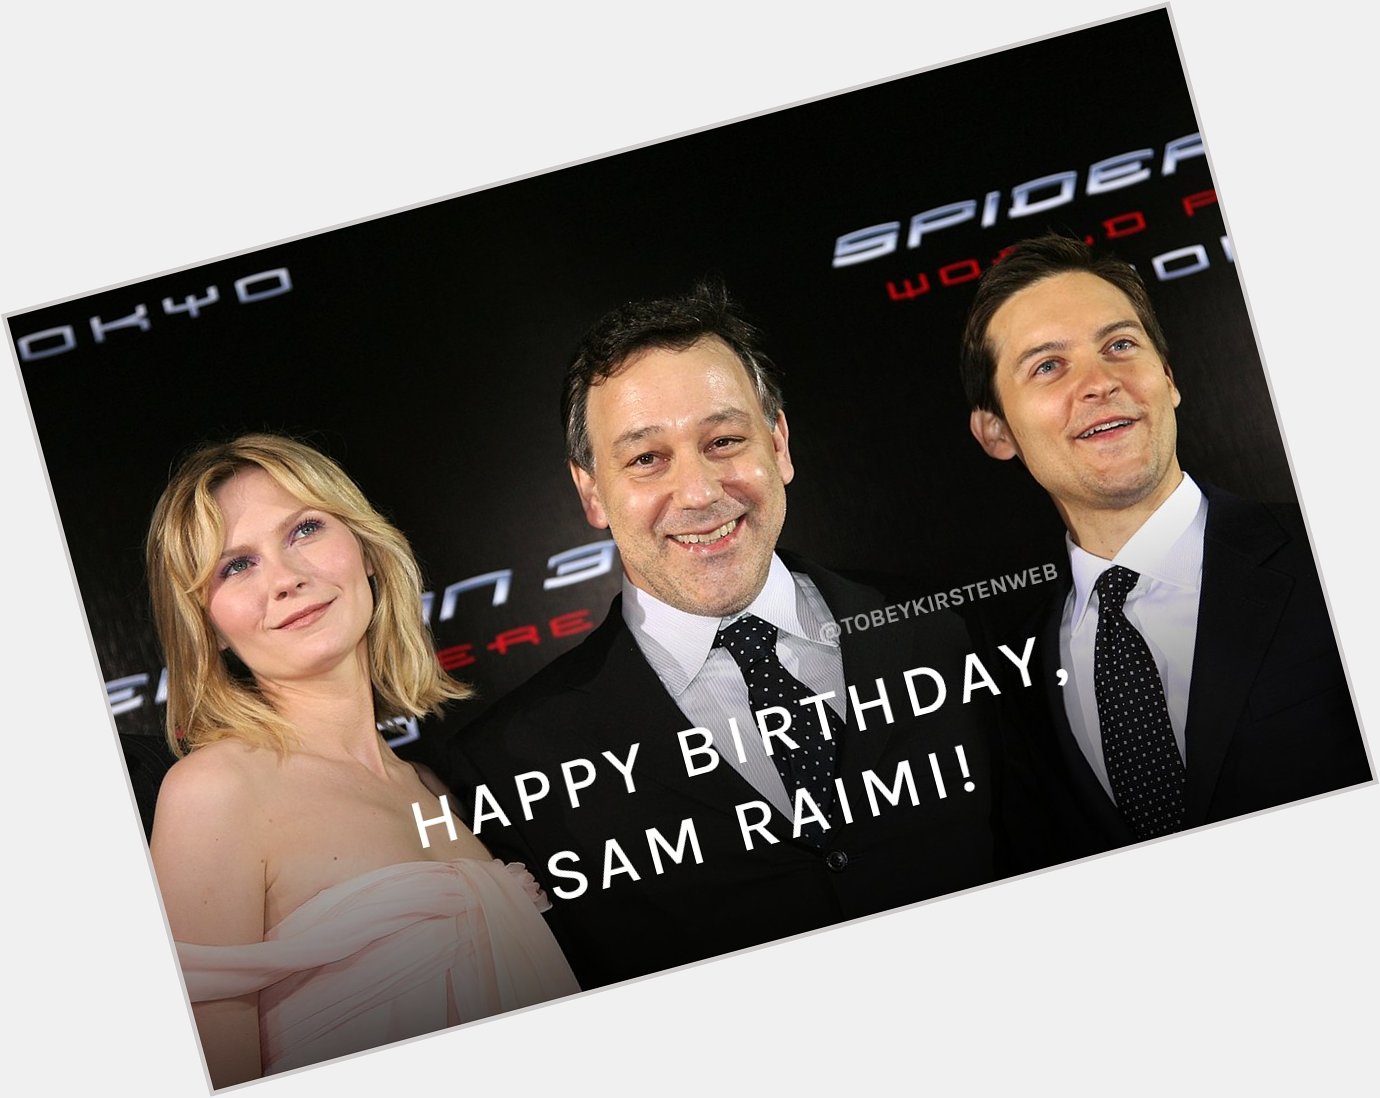  Happy 62nd birthday to Sam Raimi, the director of the \Spider-Man\ trilogy! 